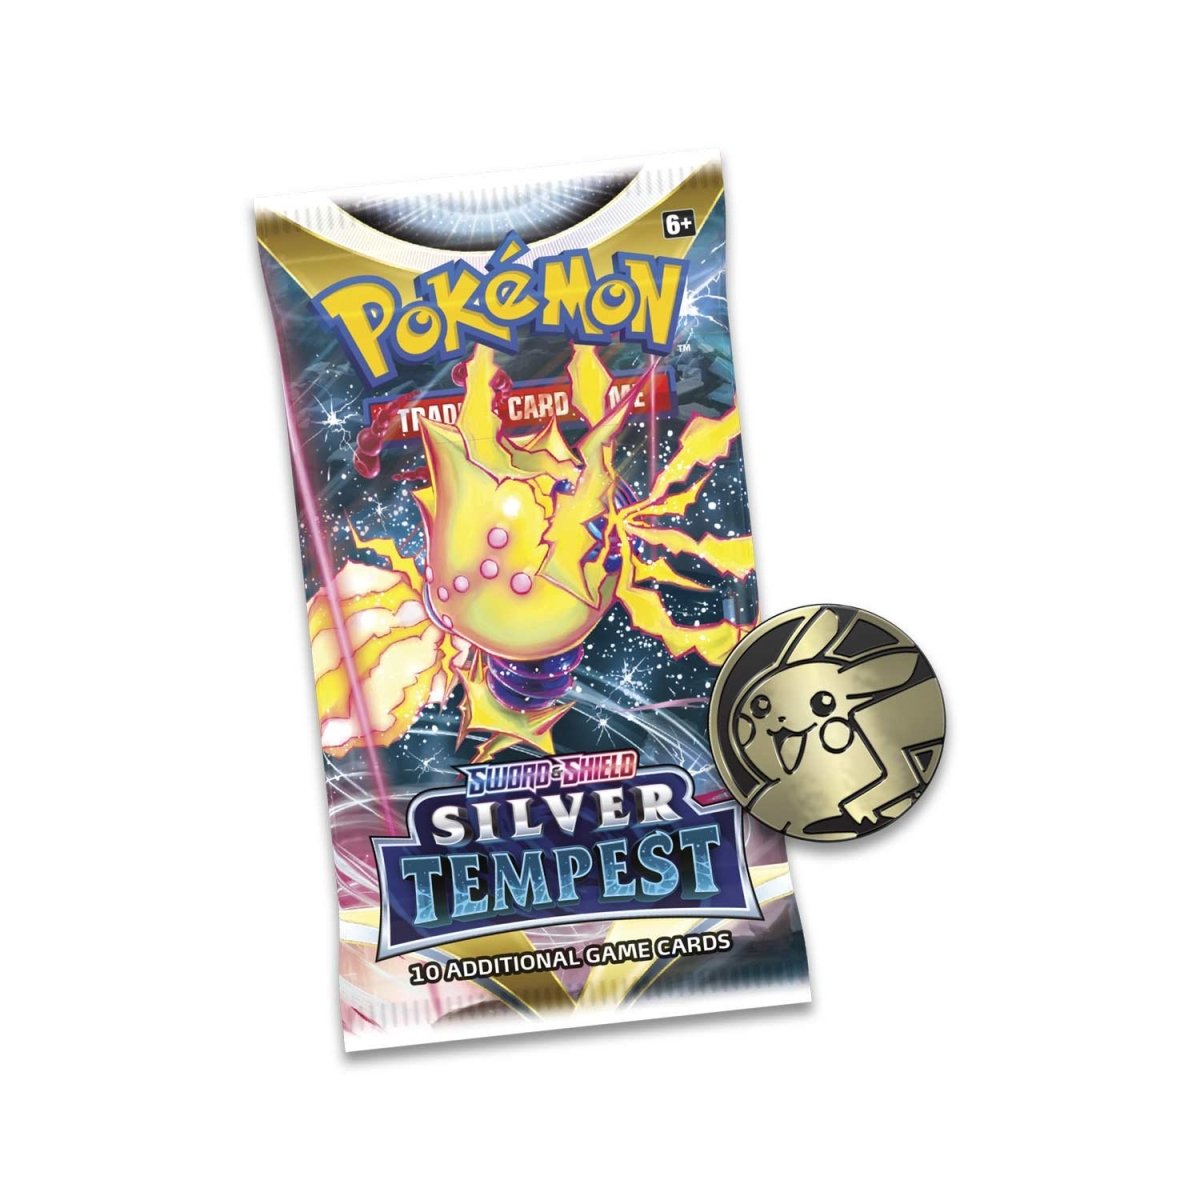 Pokémon Tcg Sword And Shield Silver Tempest 3 Booster Packs Coin And Manaphy Promo Card Pokémon